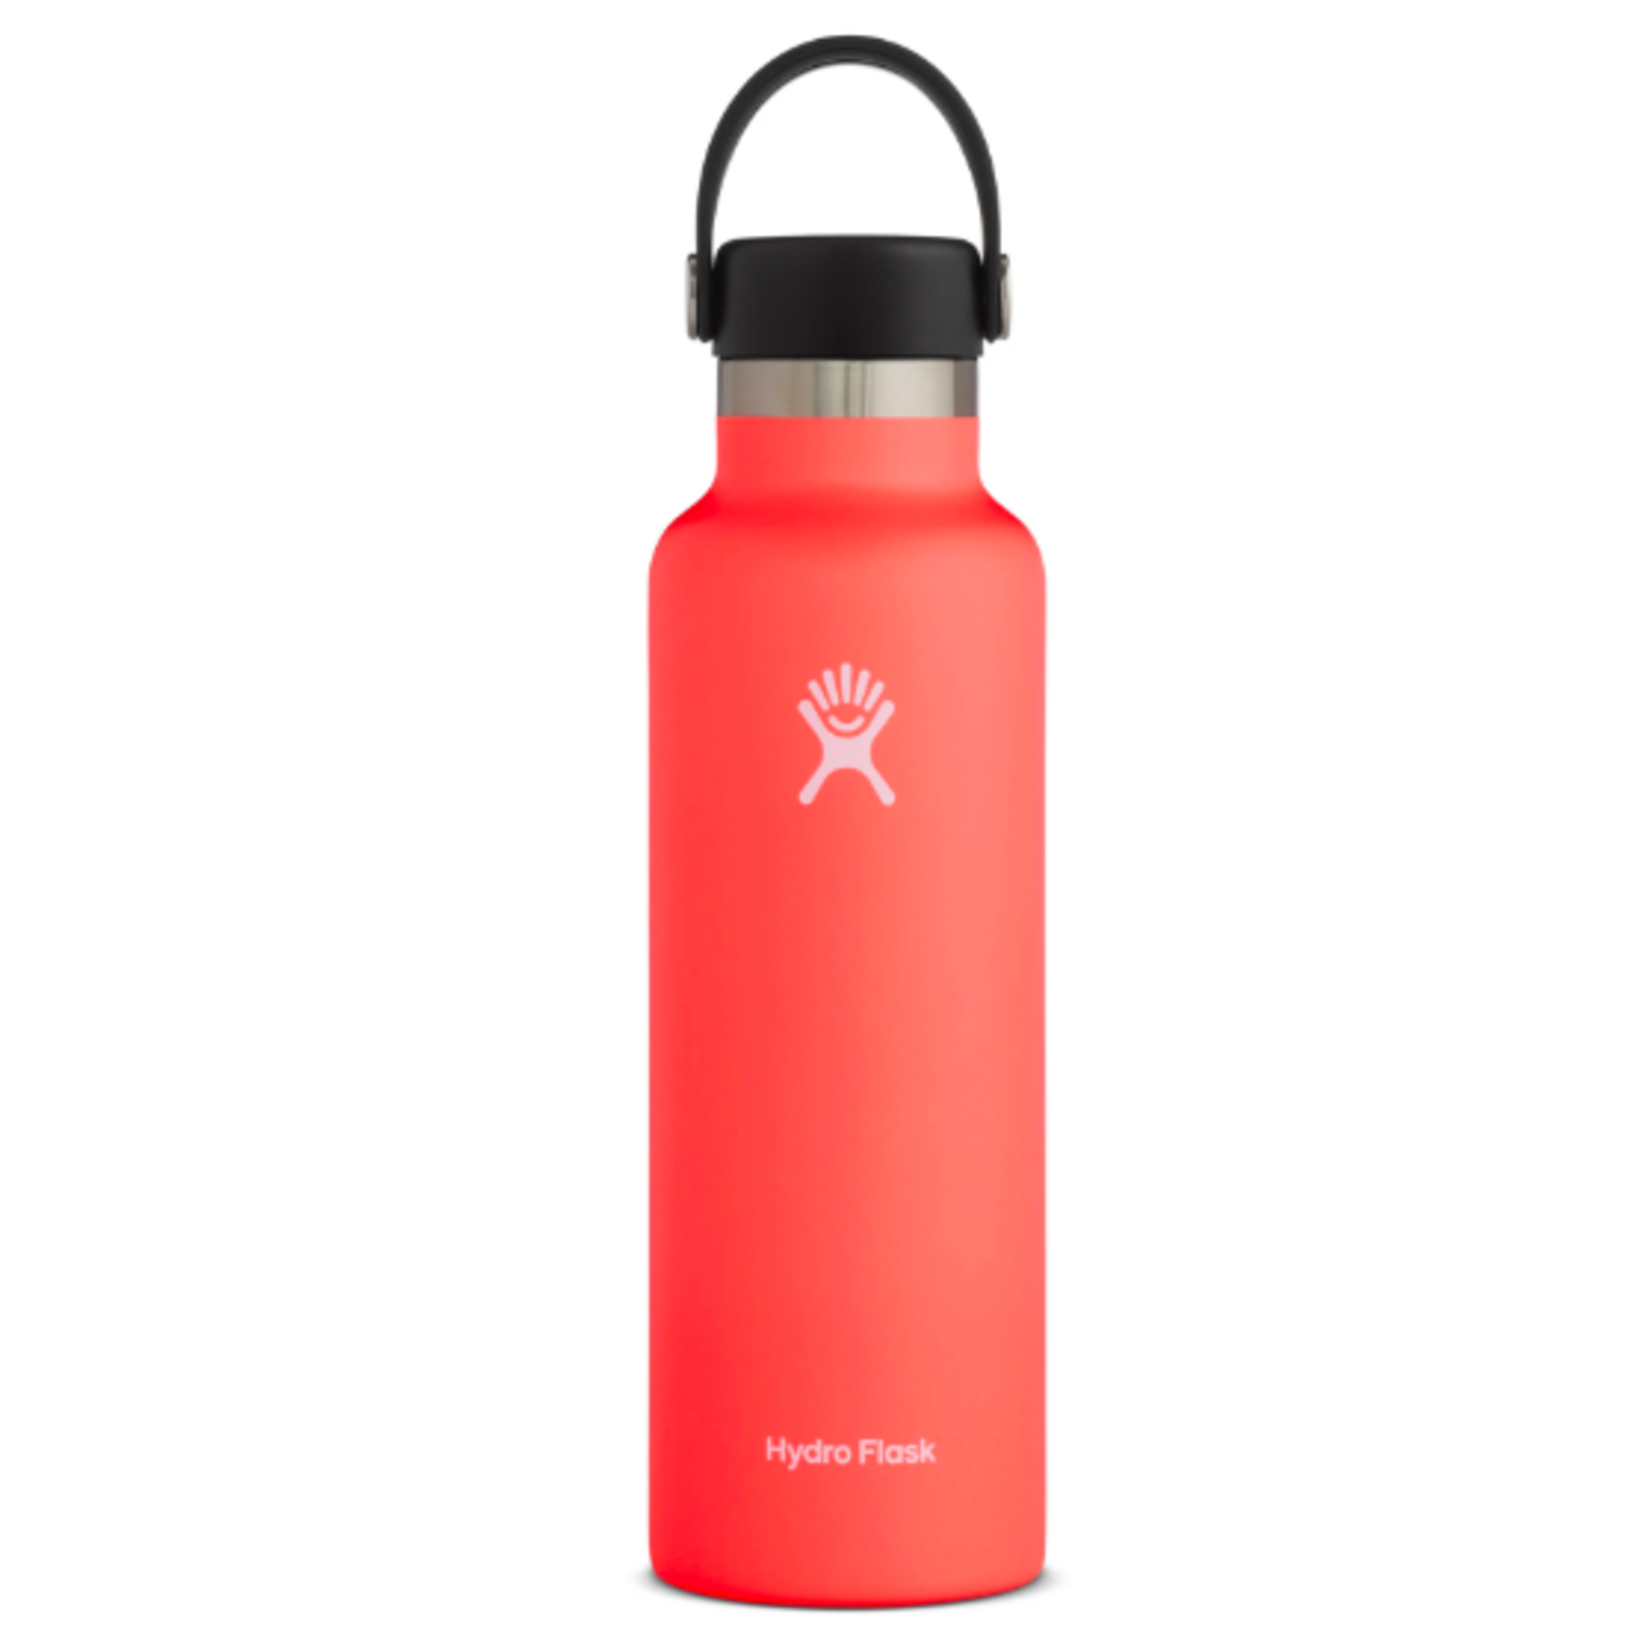 Hydro Flask Hydro Flask Standard Mouth Bottle - Flex Cap Double Insulated 21oz/621ml